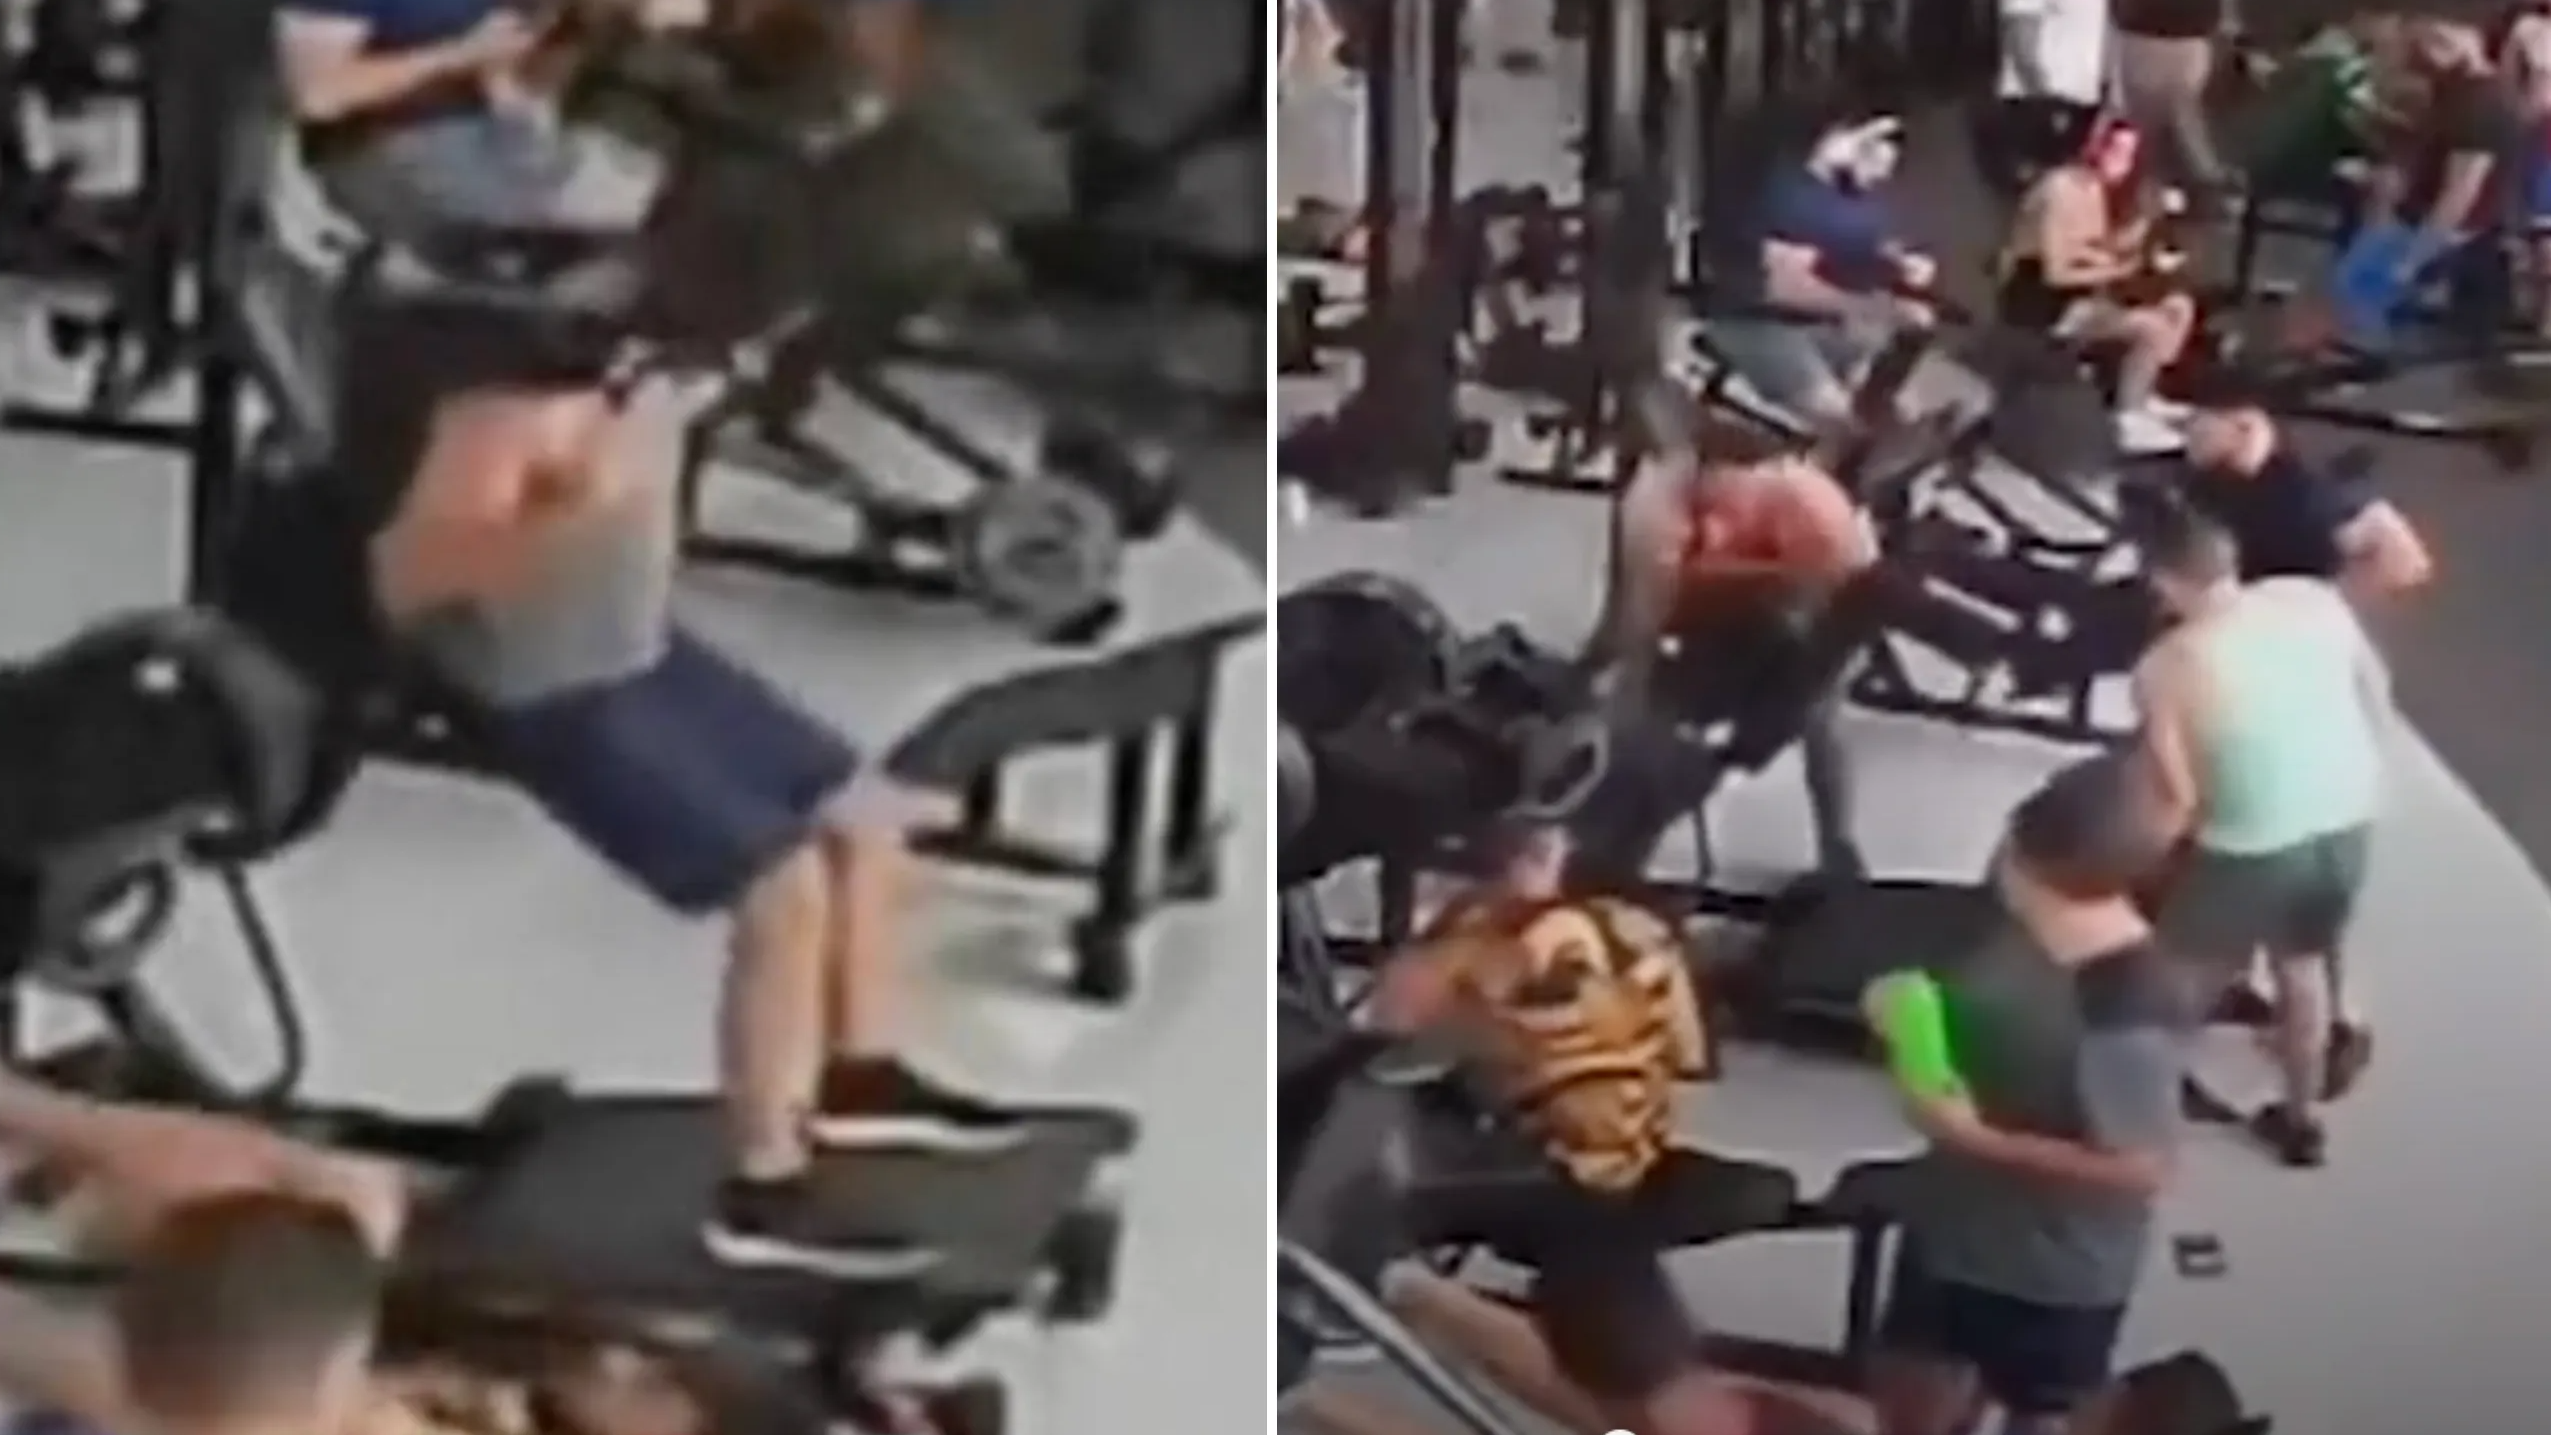 Terrifying moment man's neck is crushed by squat machine at gym in